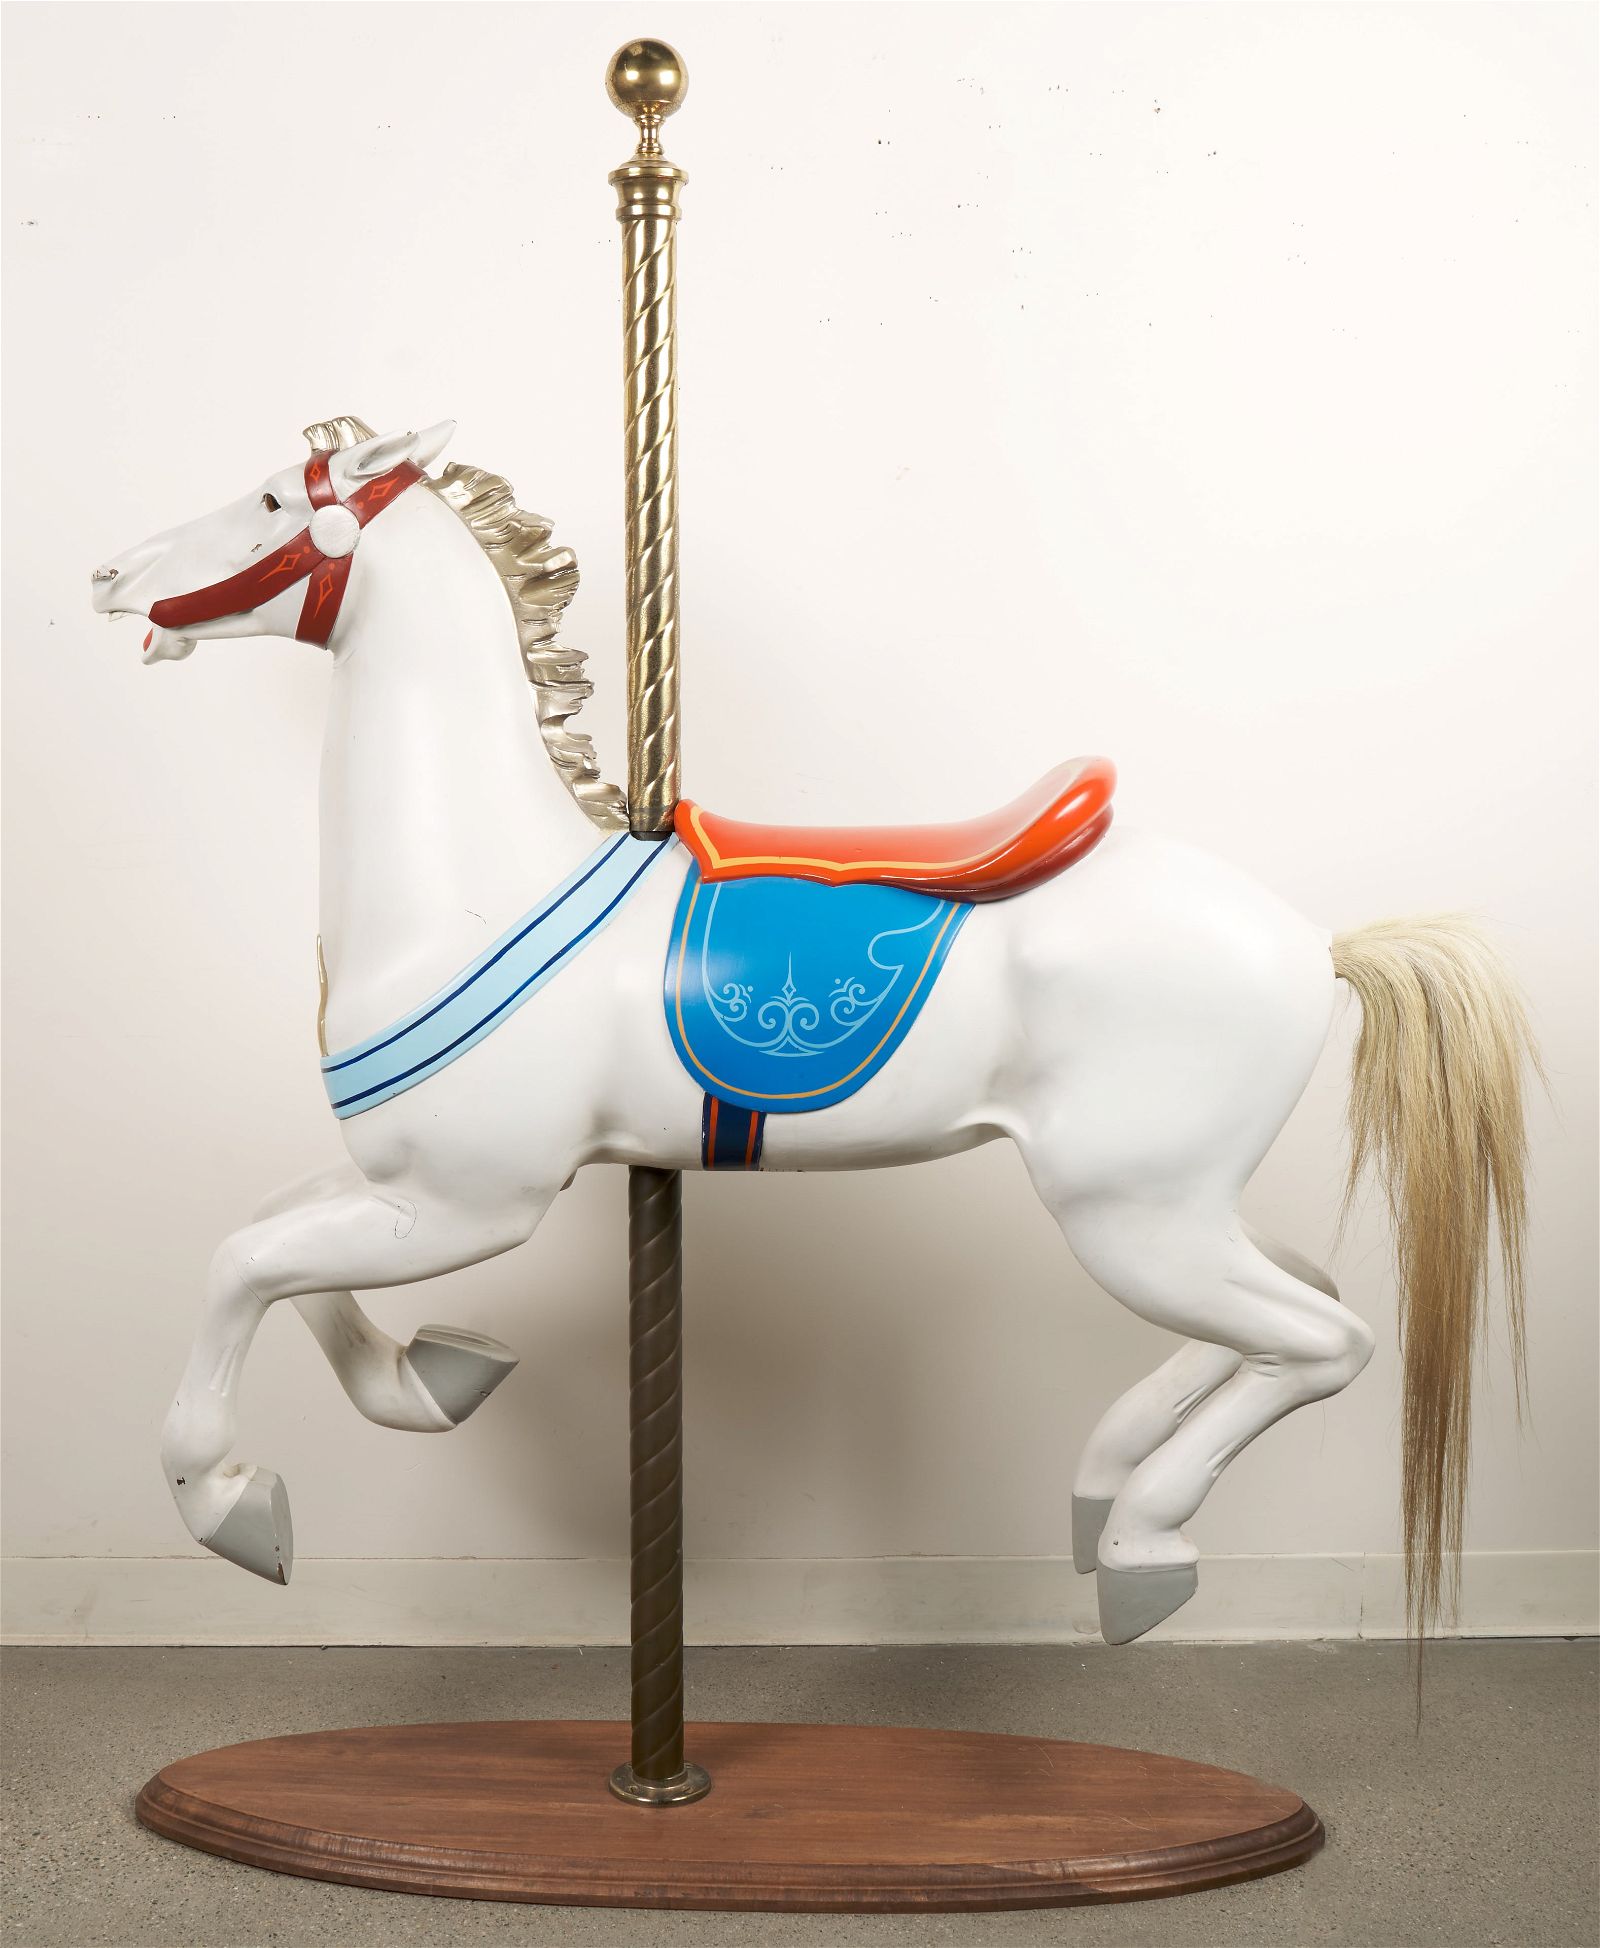 Carved and painted wood carousel horse dating to 1906, estimated at $3,000-$5,000 at Vallot Auctioneers.